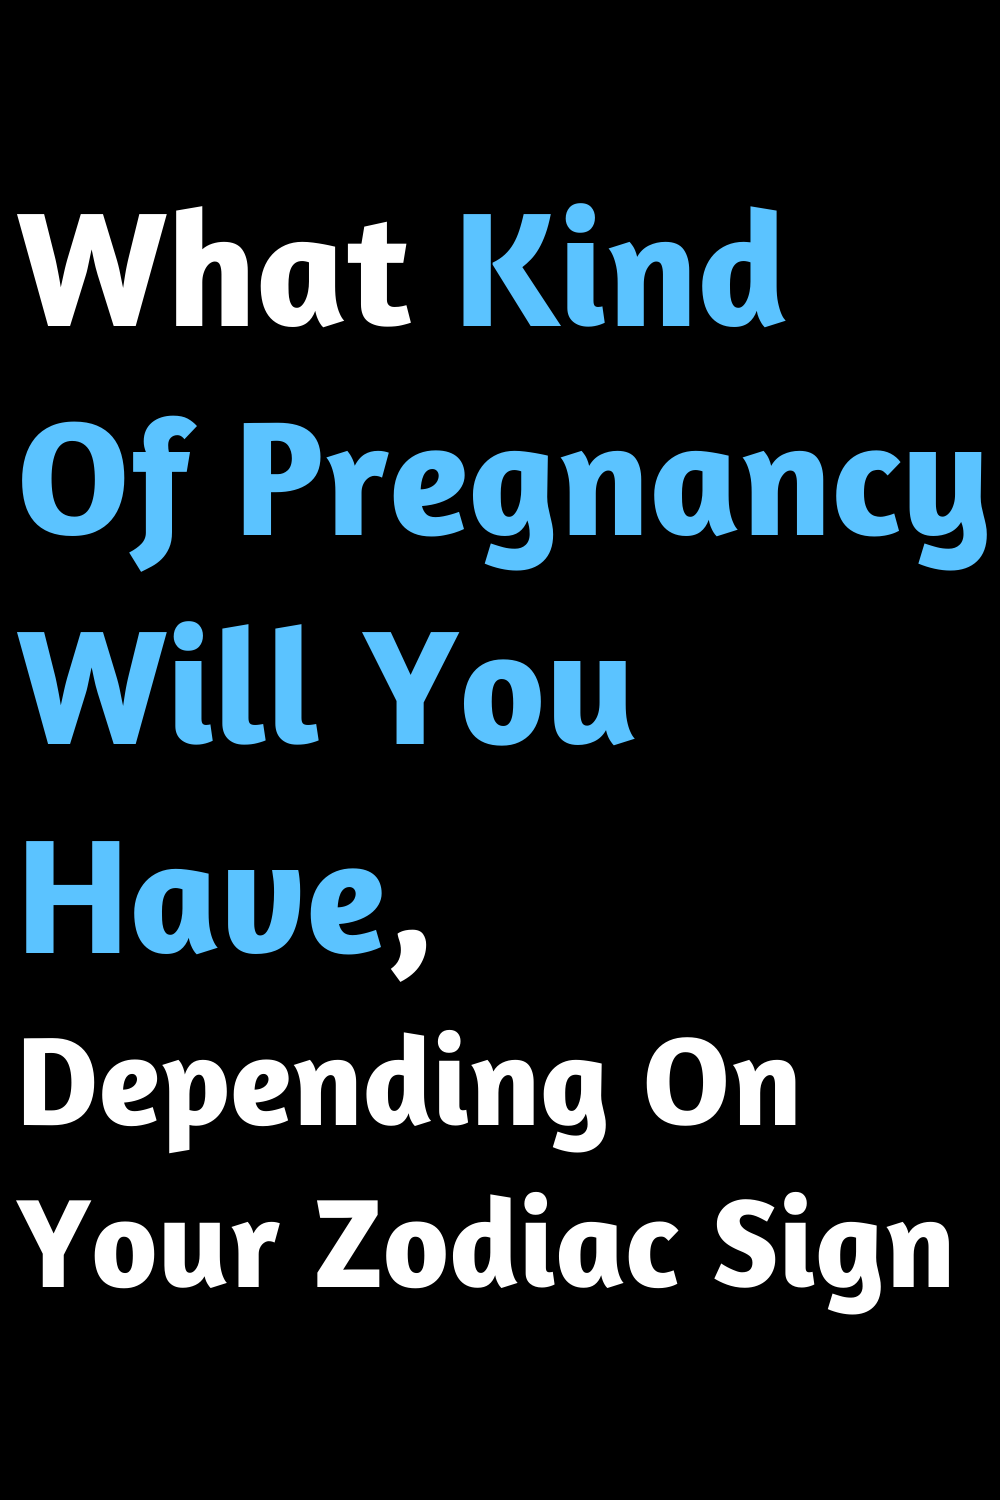 What Kind Of Pregnancy Will You Have, Depending On Your Zodiac Sign